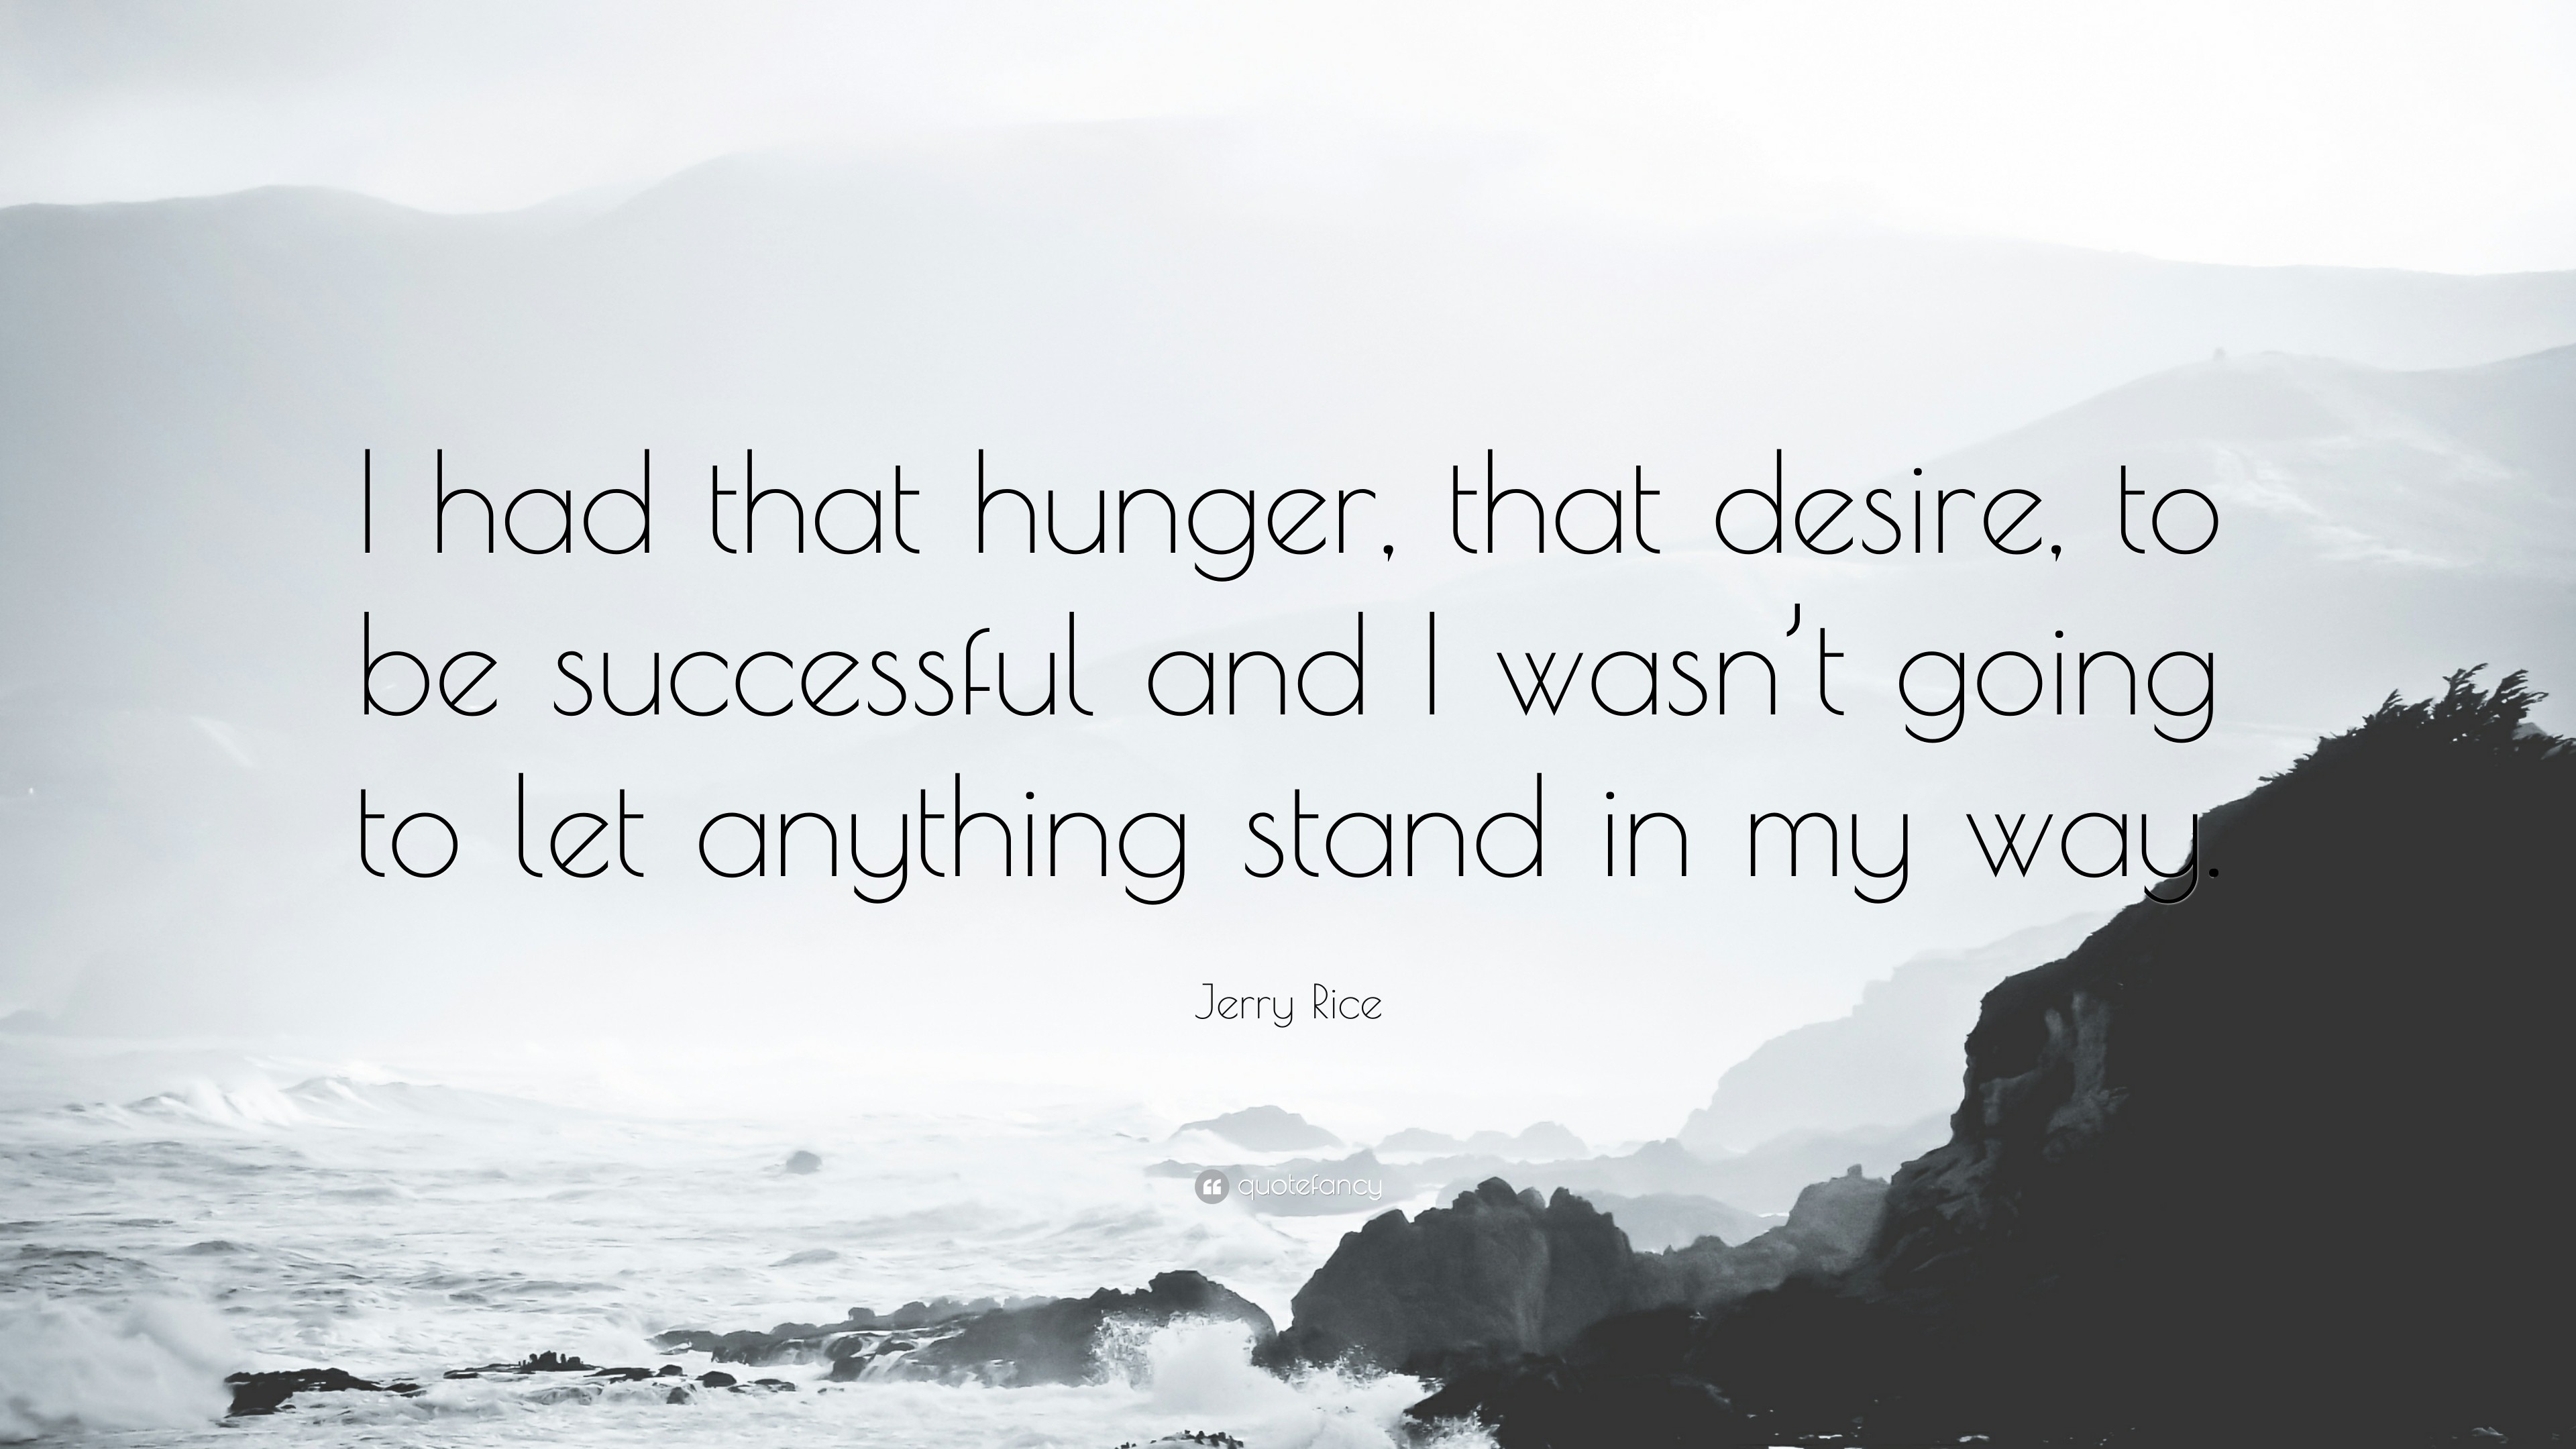 Jerry Rice Quote: “I had that hunger, that desire, to be successful